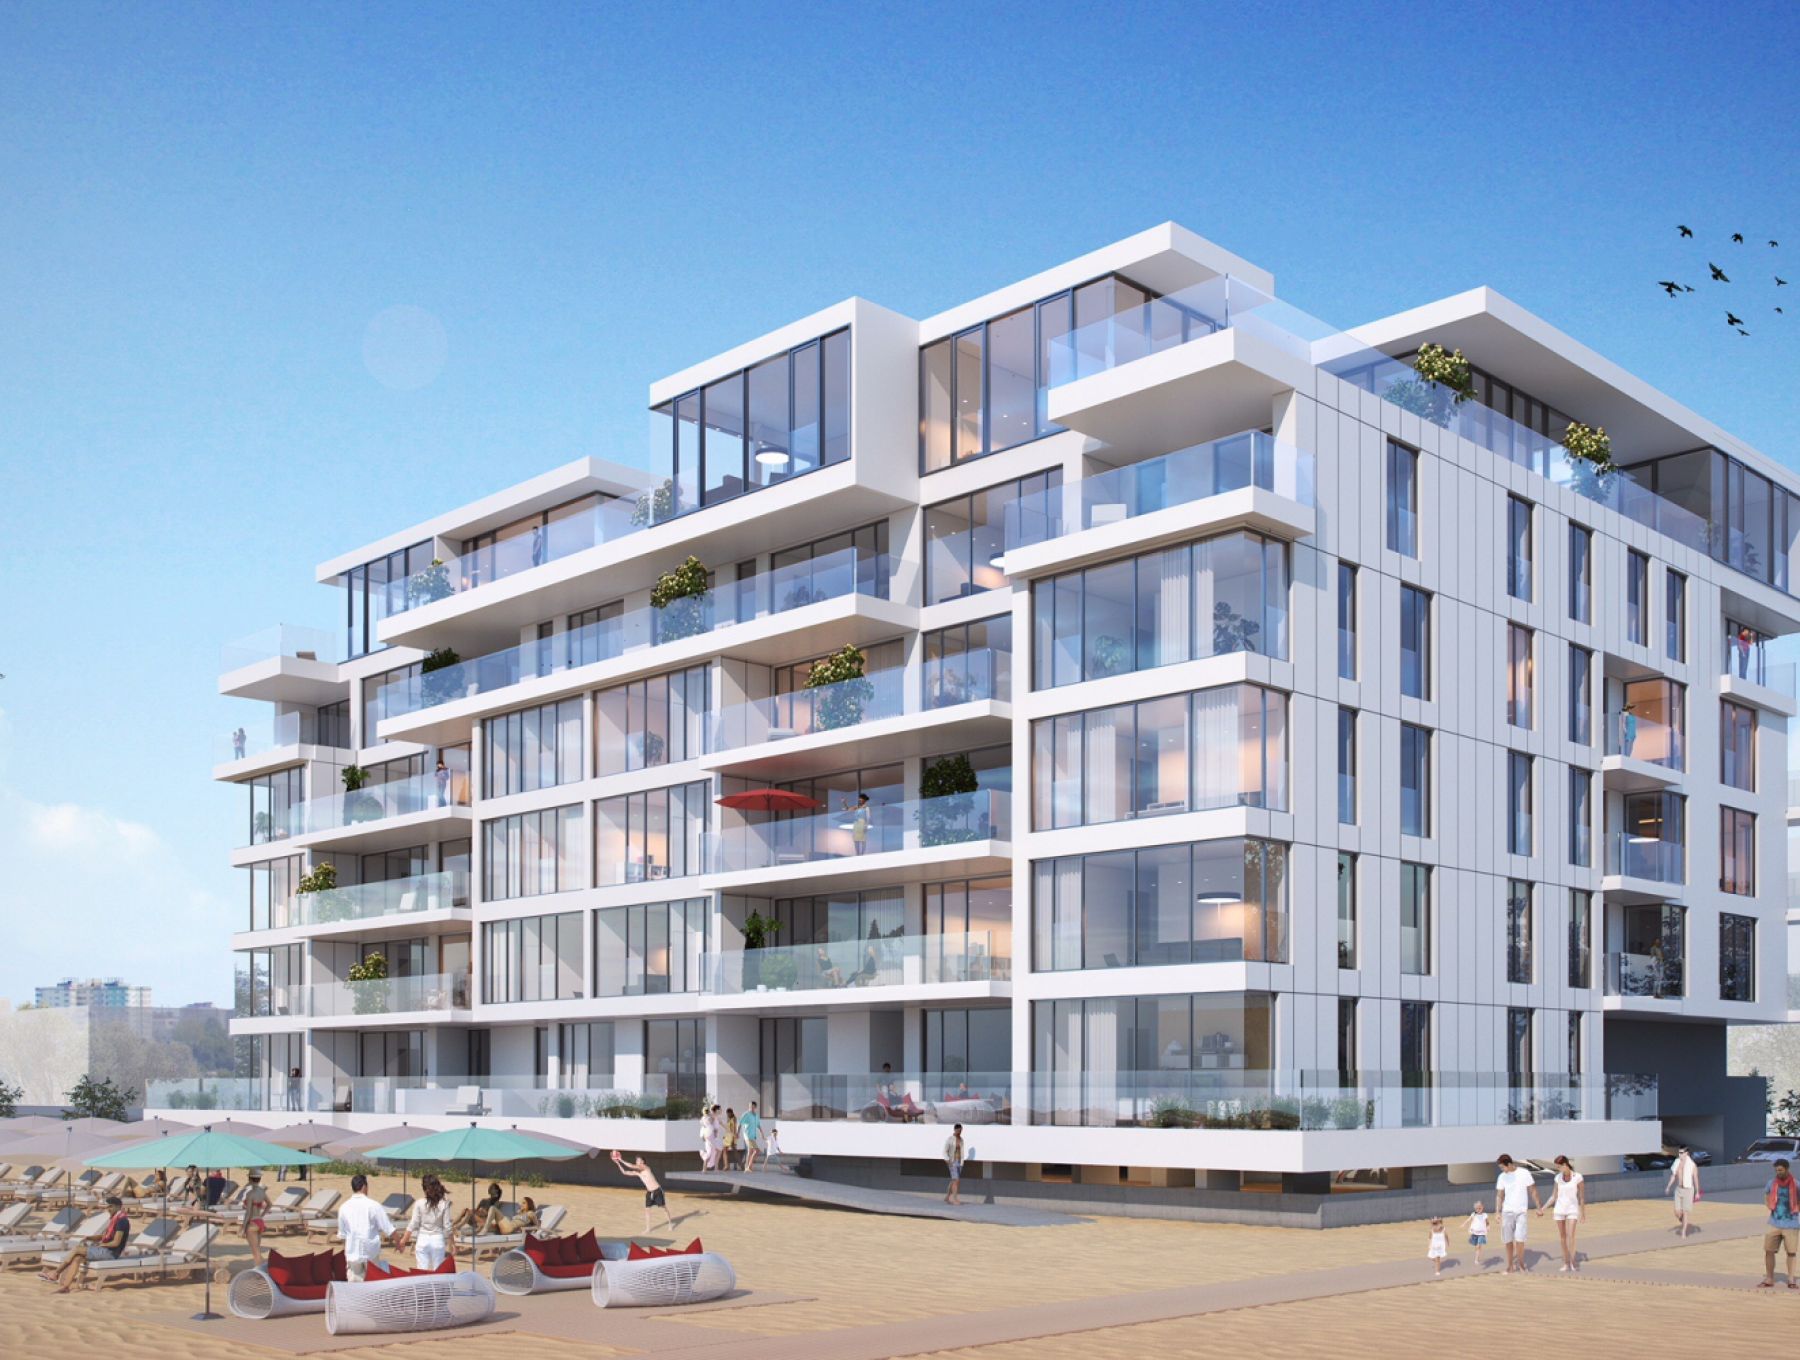 Neo Mamaia to receive building permits: site works begin this month